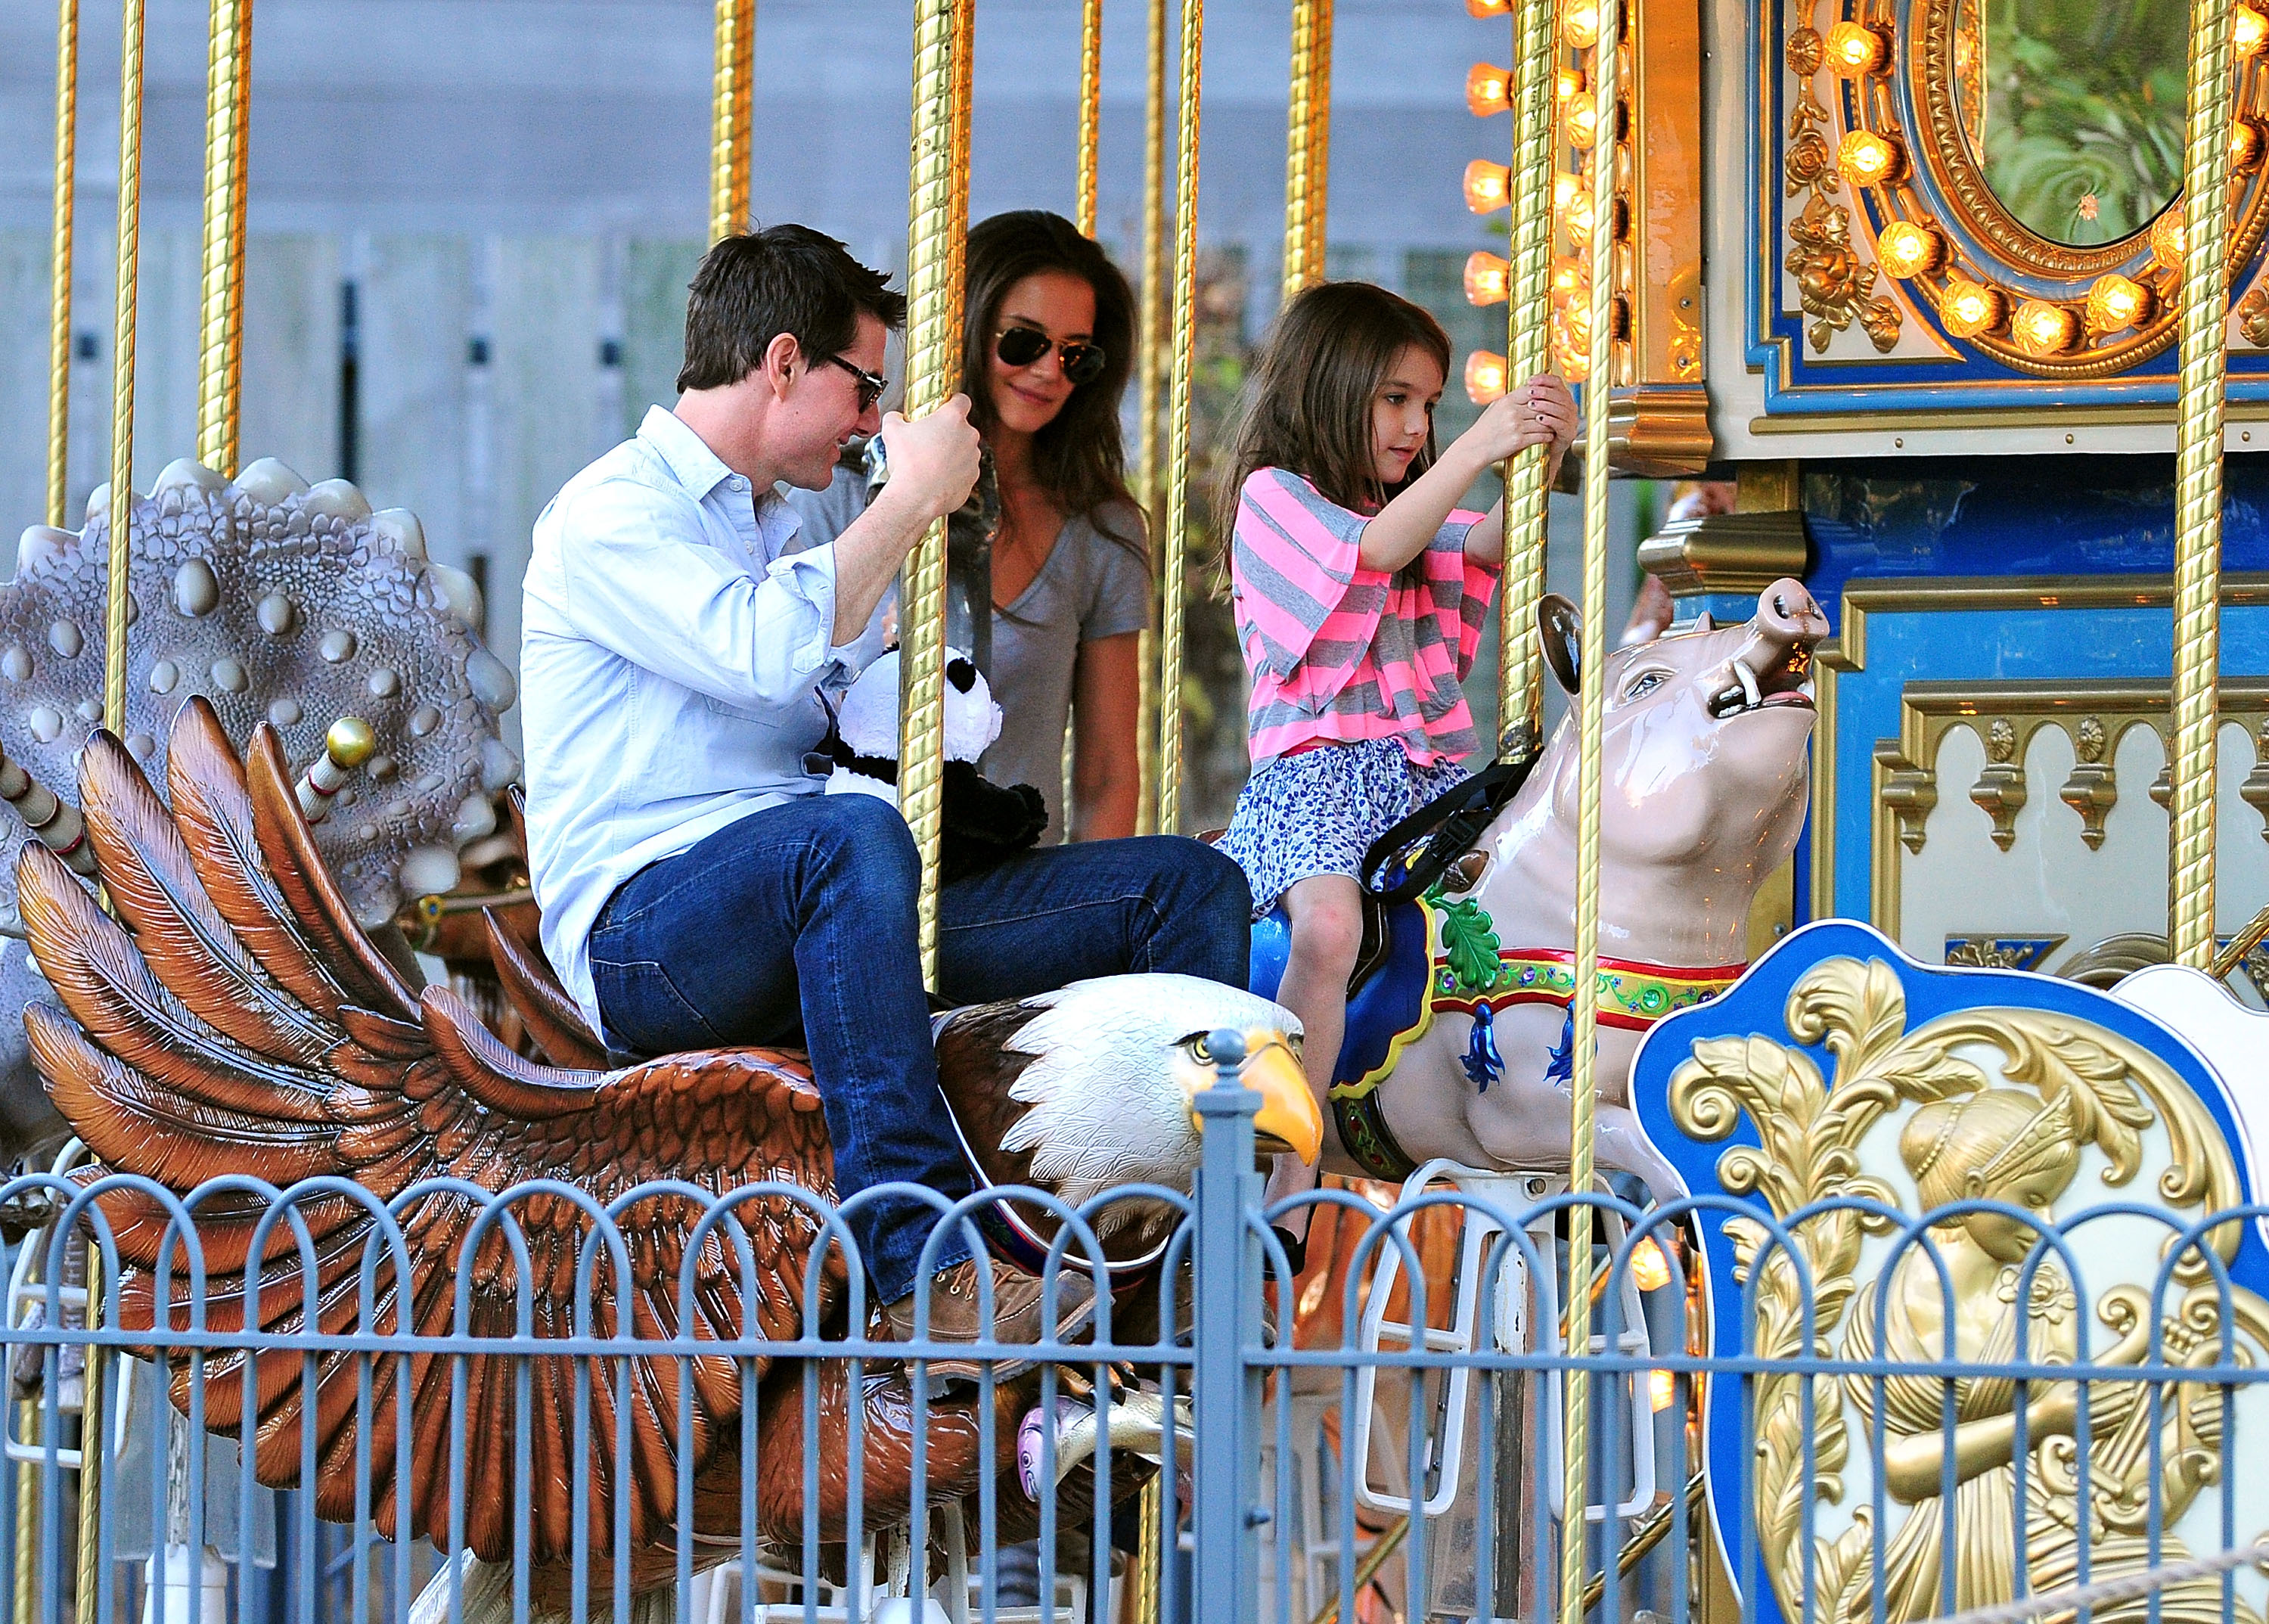 Tom Cruise, Katie Holmes, and Suri Cruise visit Schenley Plaza's carousel in Pittsburgh, Pennsylvania, on October 8, 2011. | Source: Getty Images